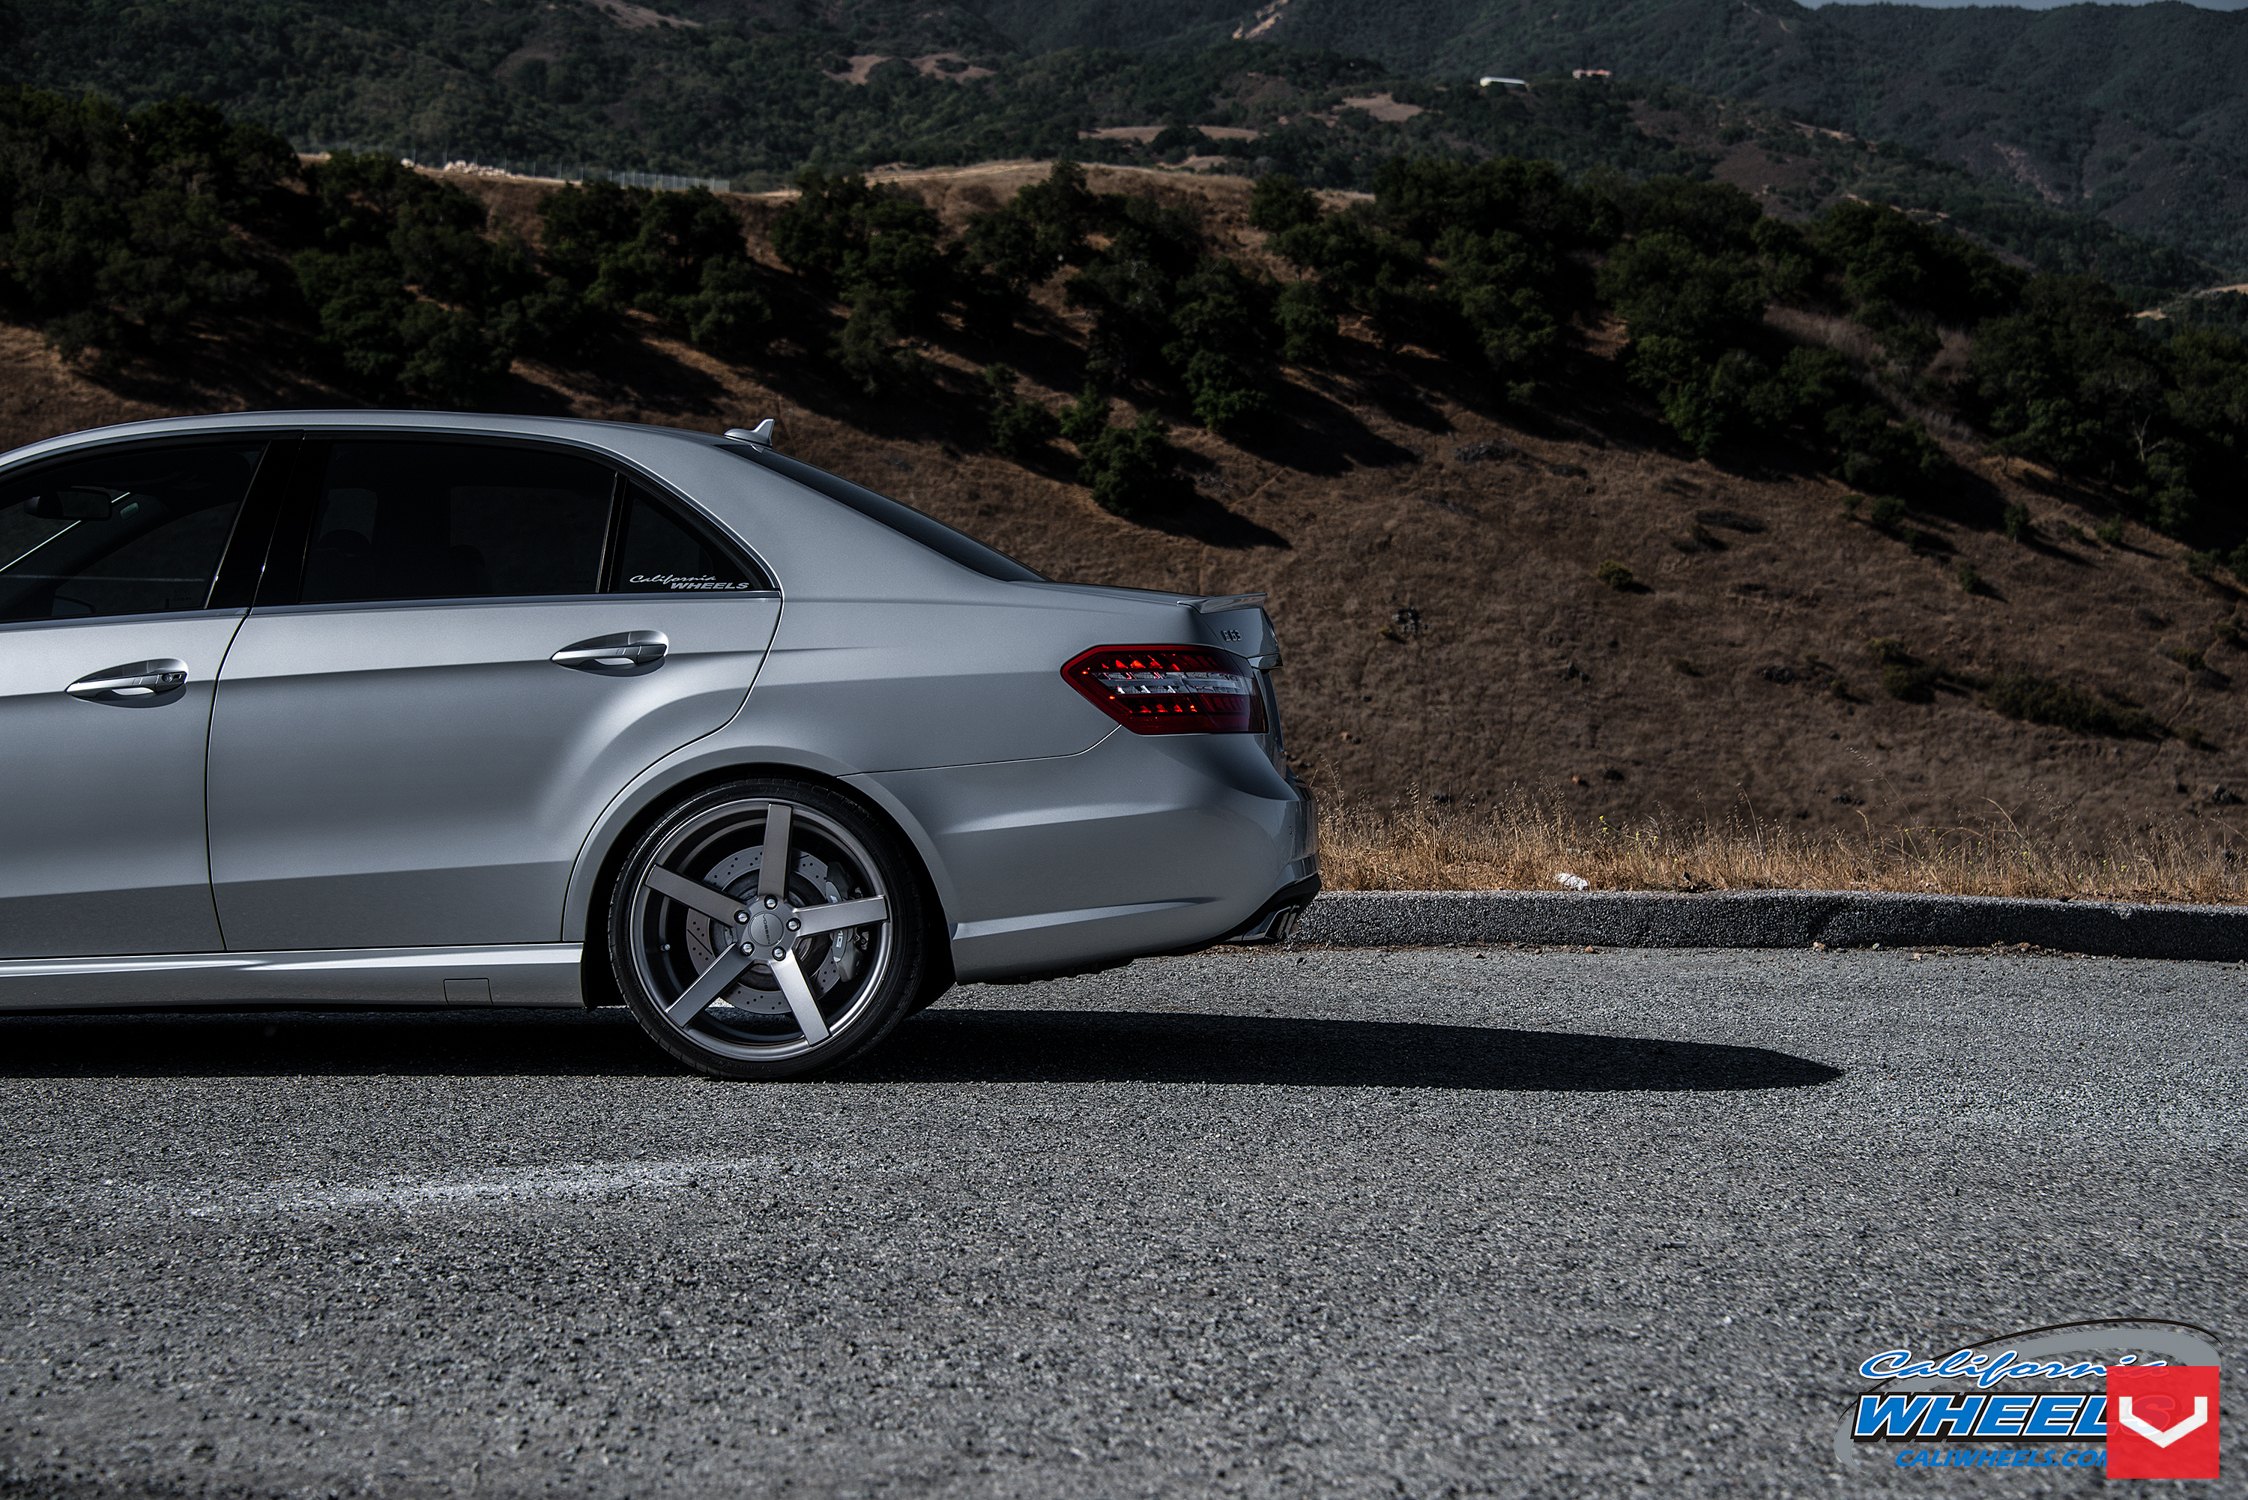 Red Clear LED Taillights on Silver Mercedes E Class - Photo by Vossen